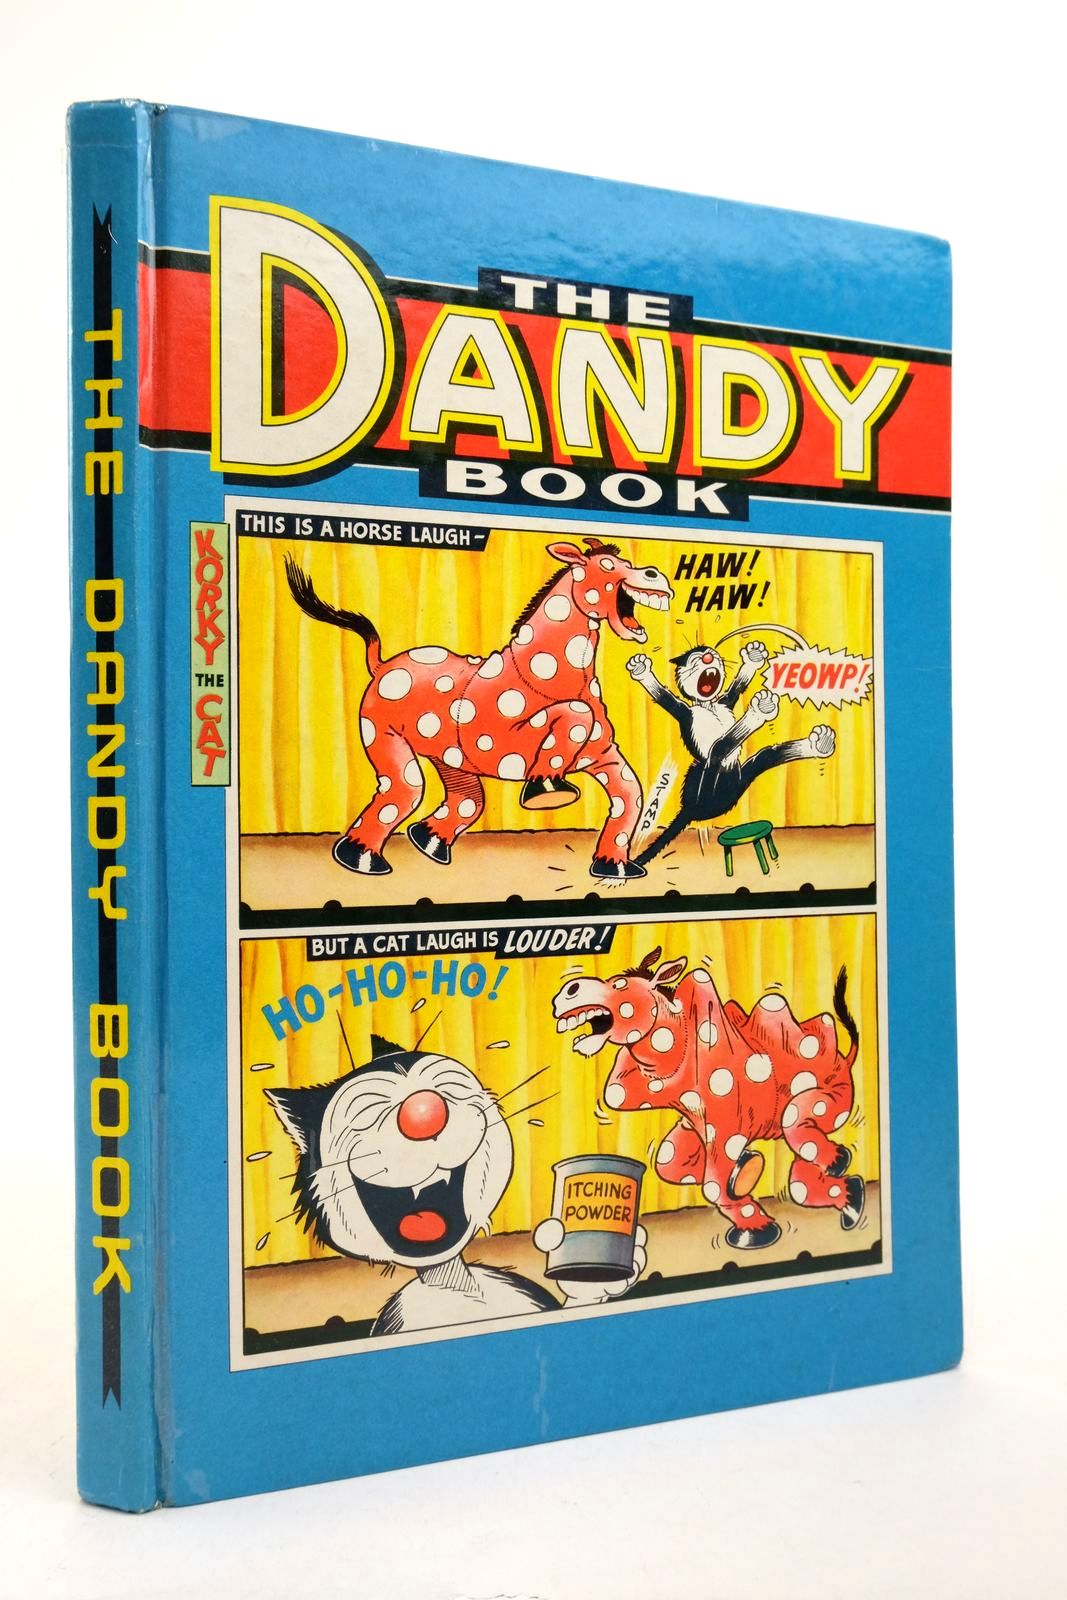 Photo of THE DANDY BOOK 1965 published by D.C. Thomson &amp; Co Ltd. (STOCK CODE: 2140612)  for sale by Stella & Rose's Books